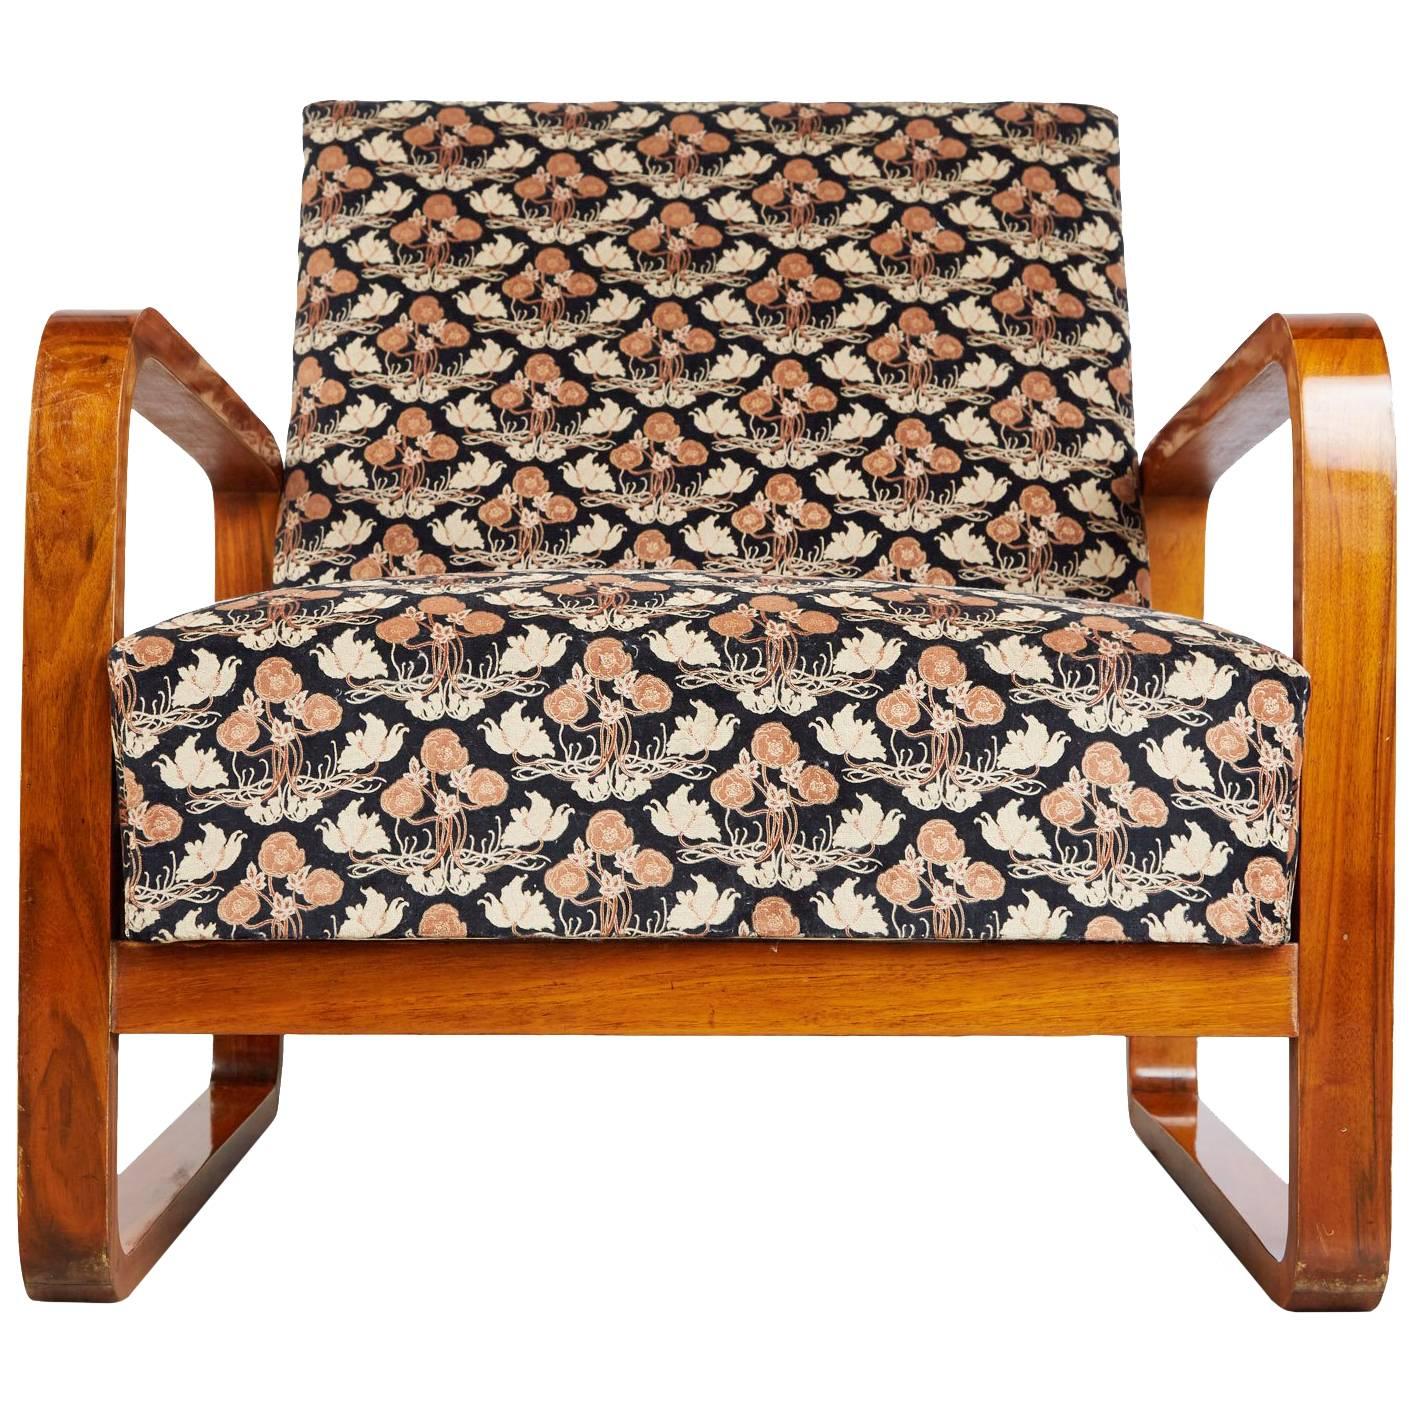 Art Deco Sleeper Armchair with Fabric Attributed to William Morris, circa 1920